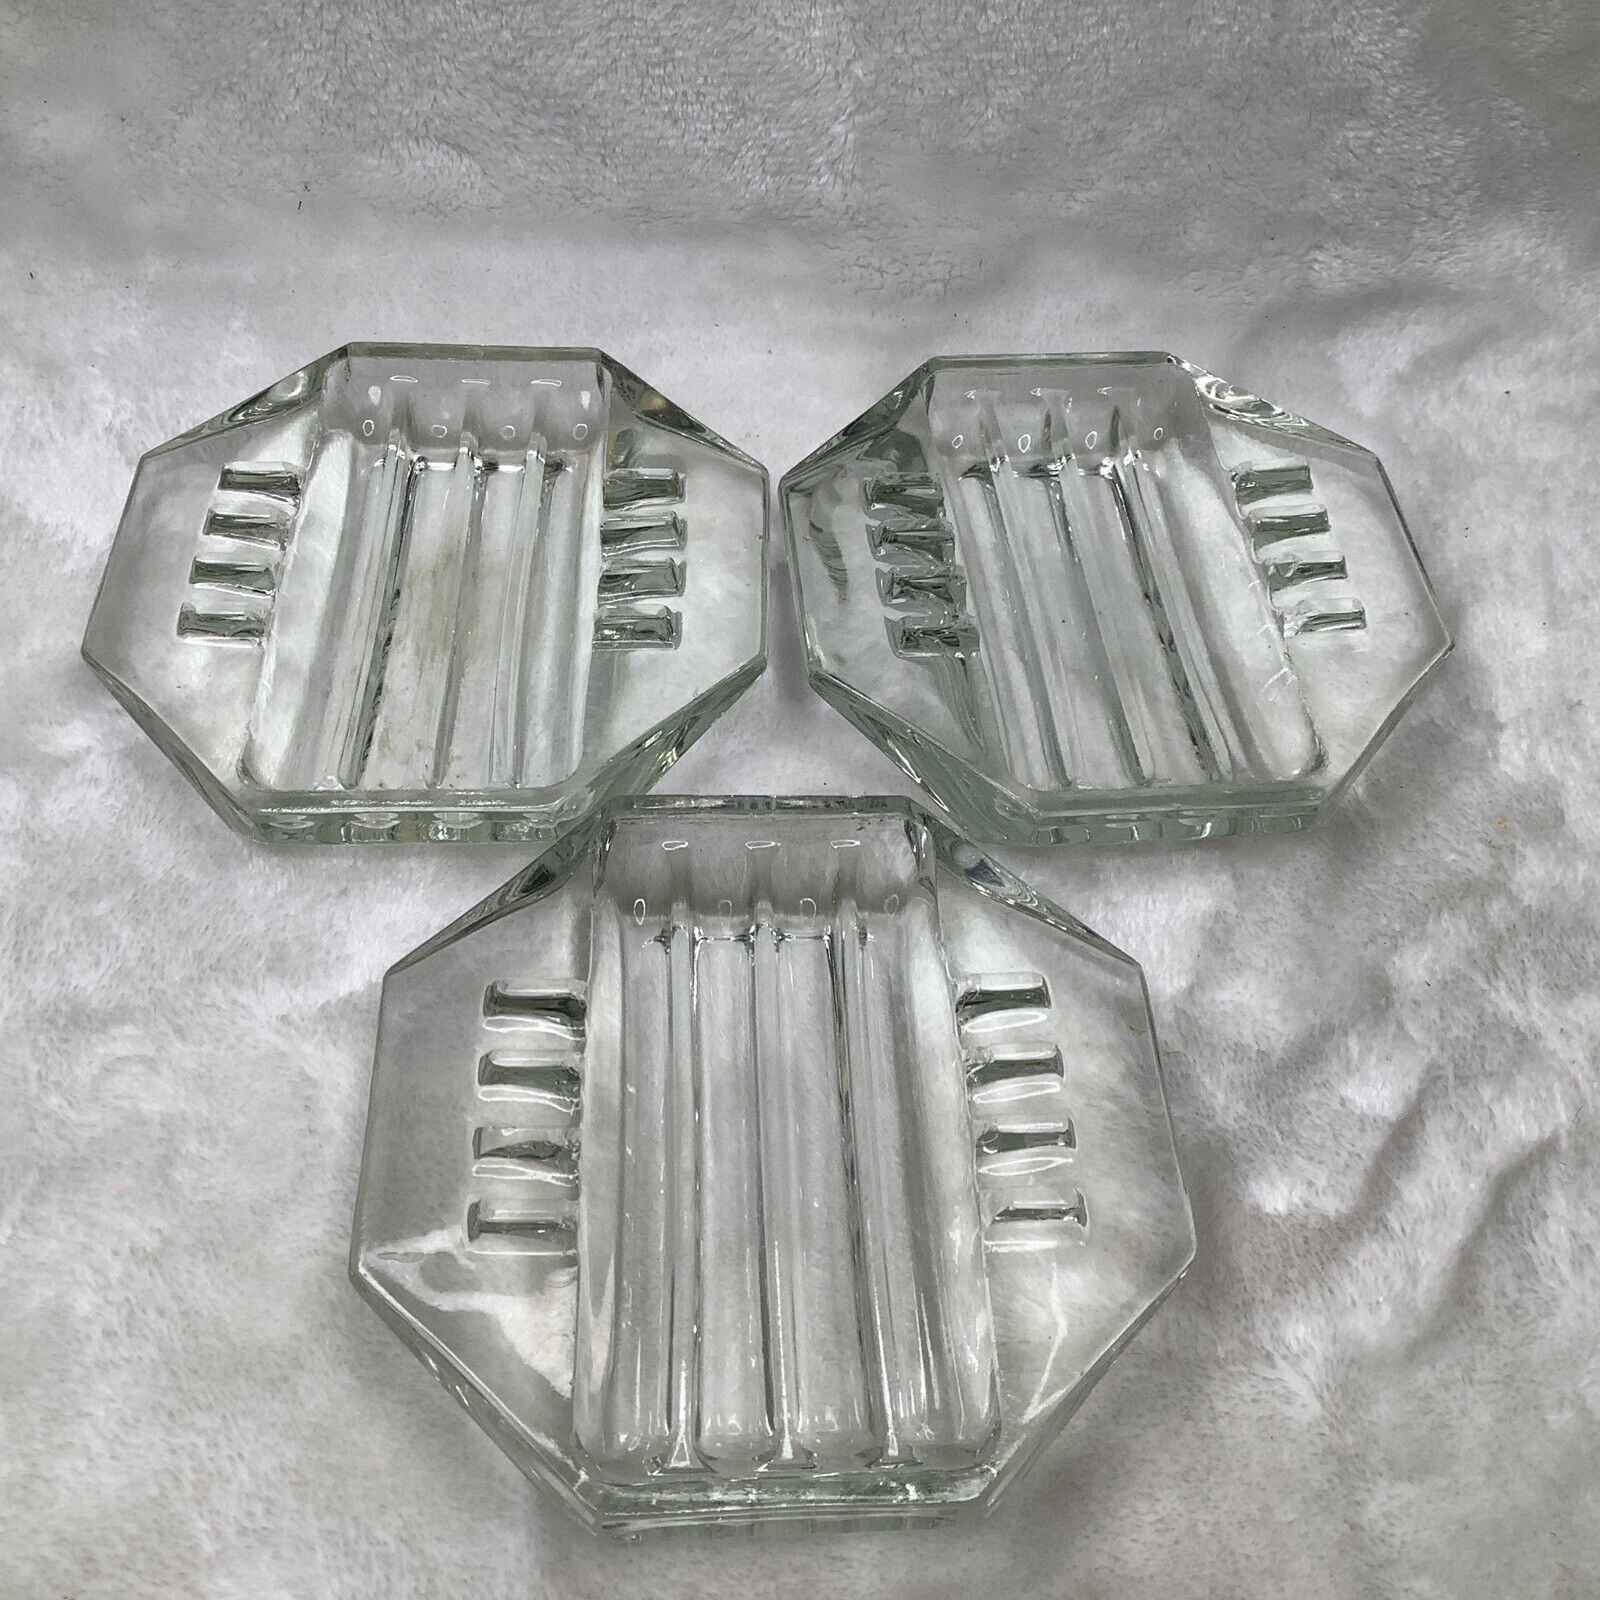 3 Vintage SAFEX Clear Glass Octagonal Shaped Ashtray Art Deco 5x5